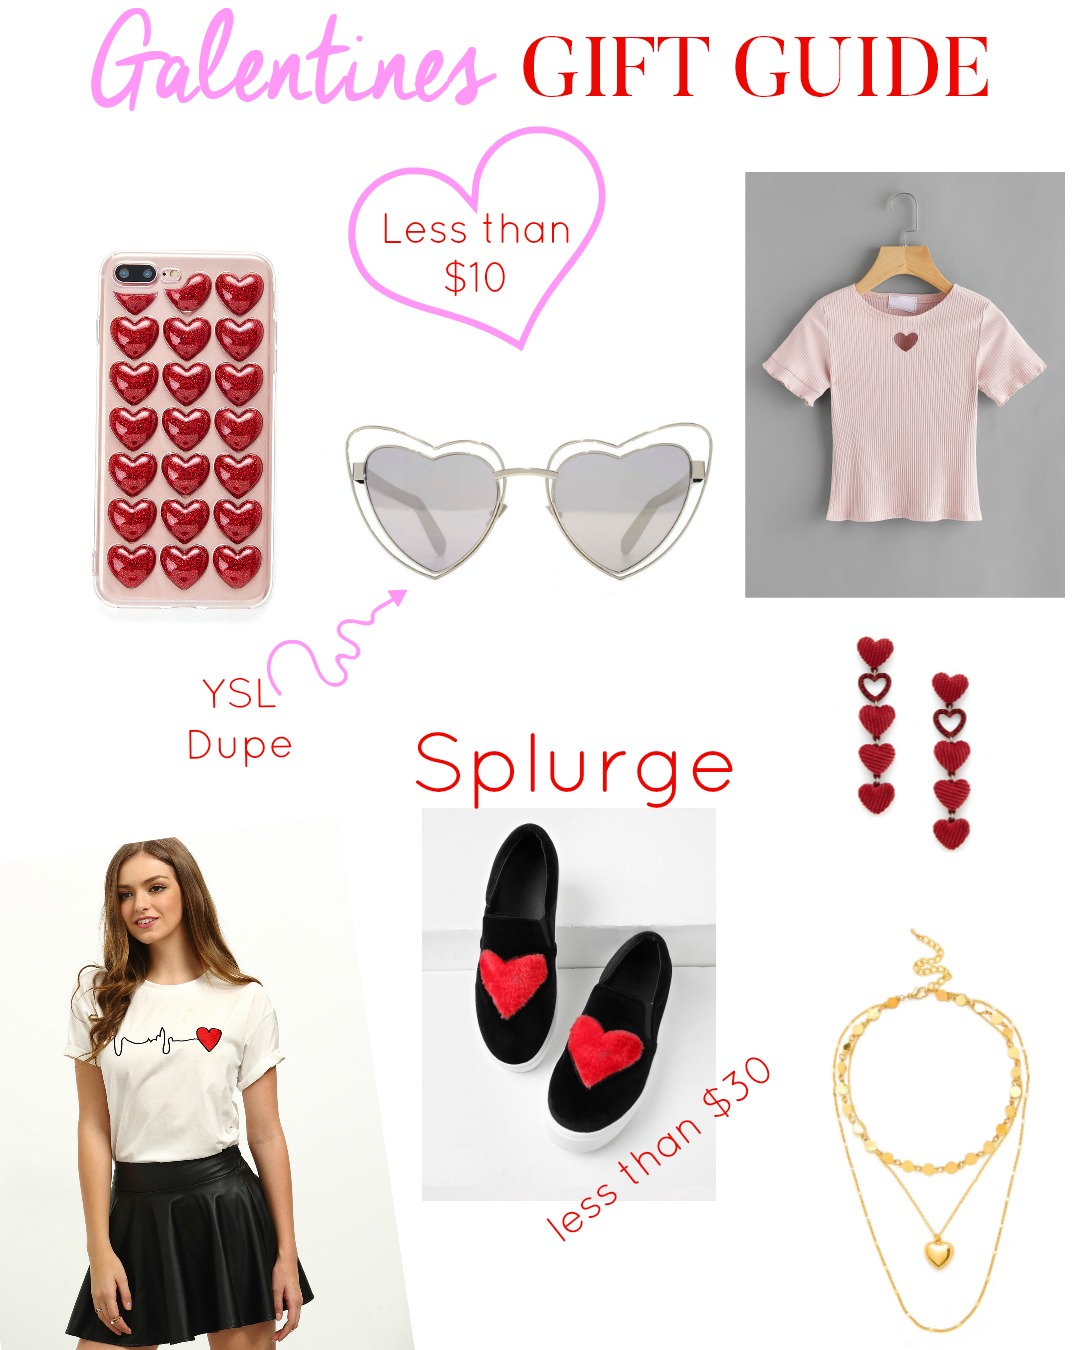 GALENTINE'S GIFT GUIDE